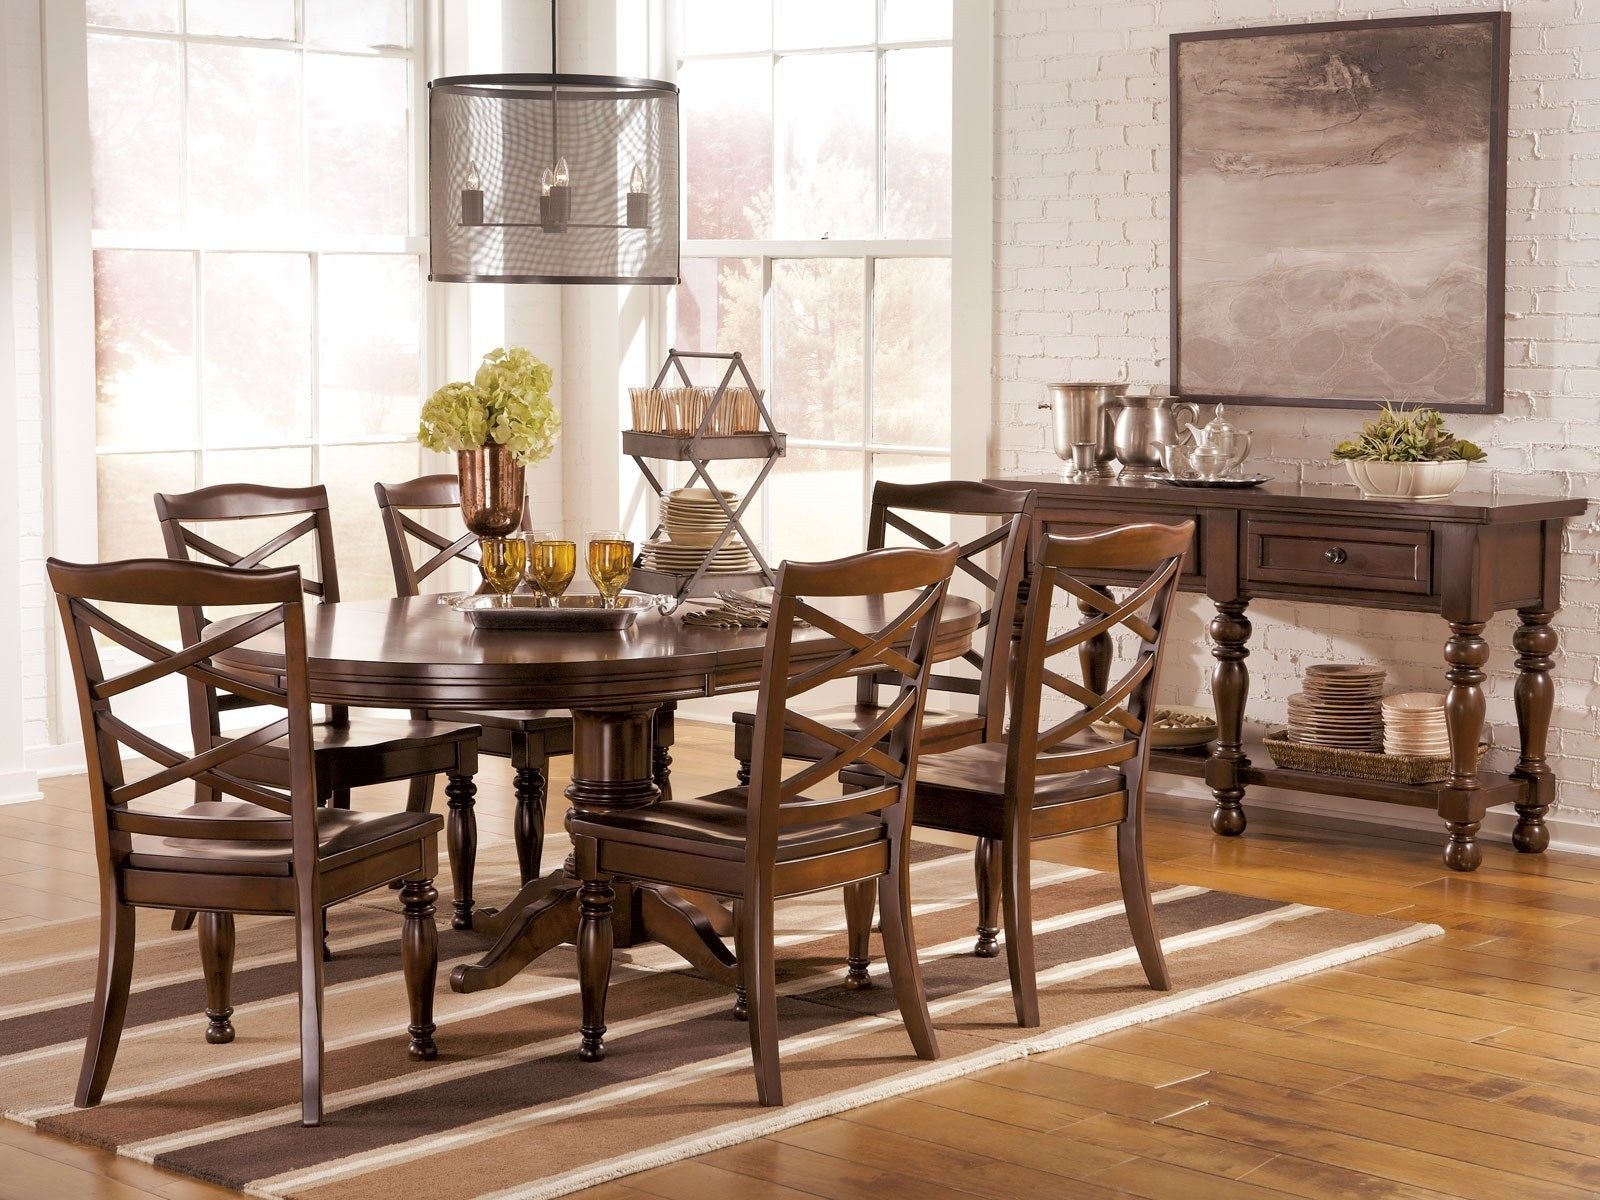 Oval dining table set for 6